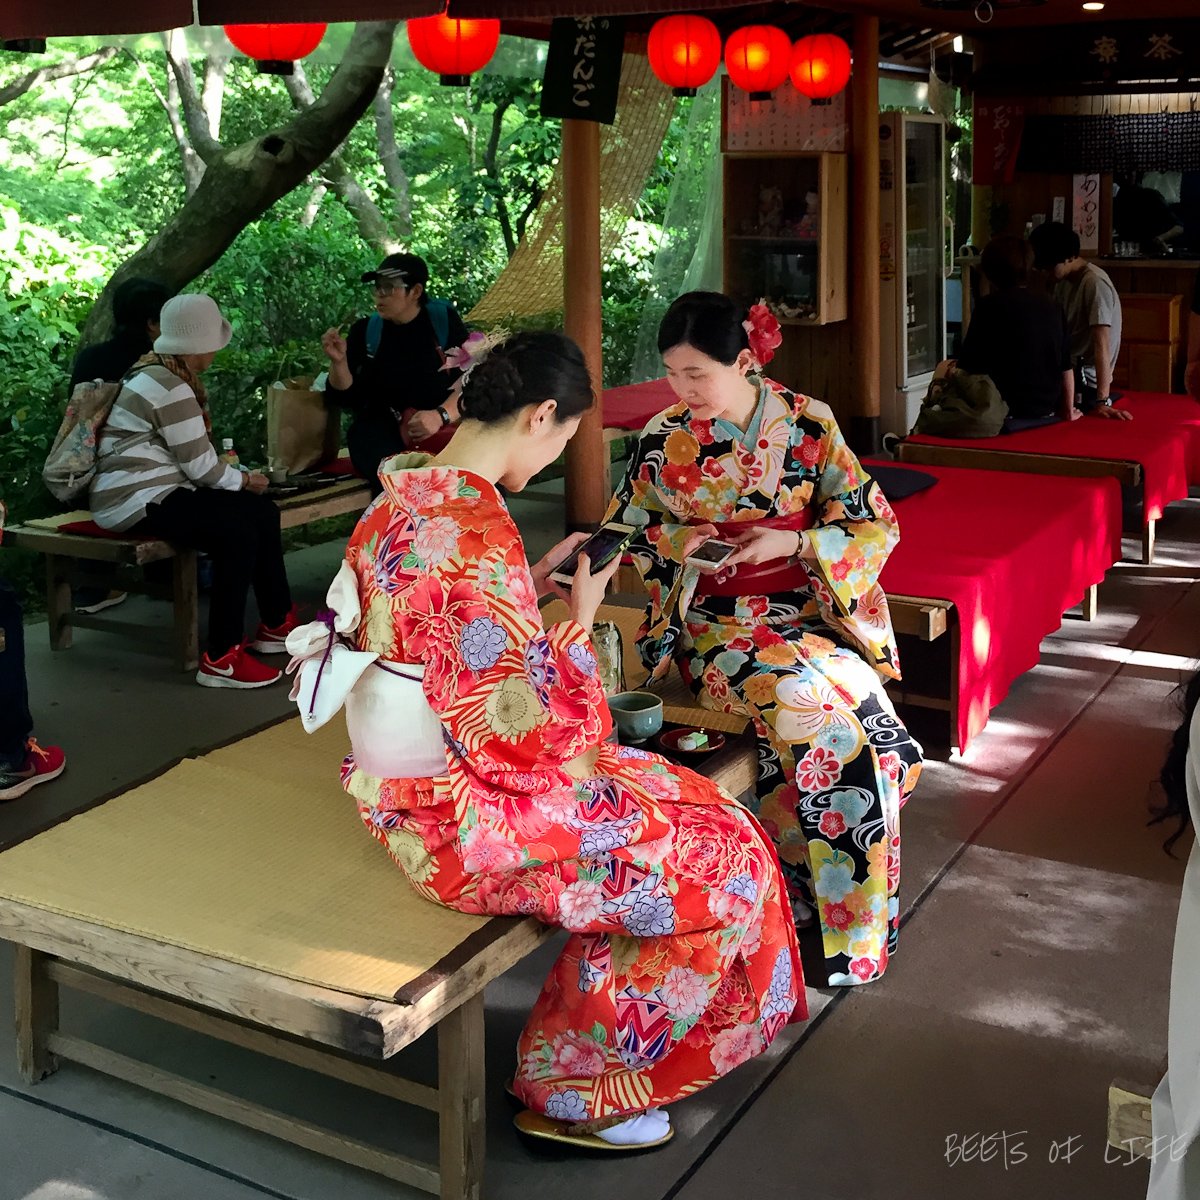 Women visiting the temple dressed in Kimonos 